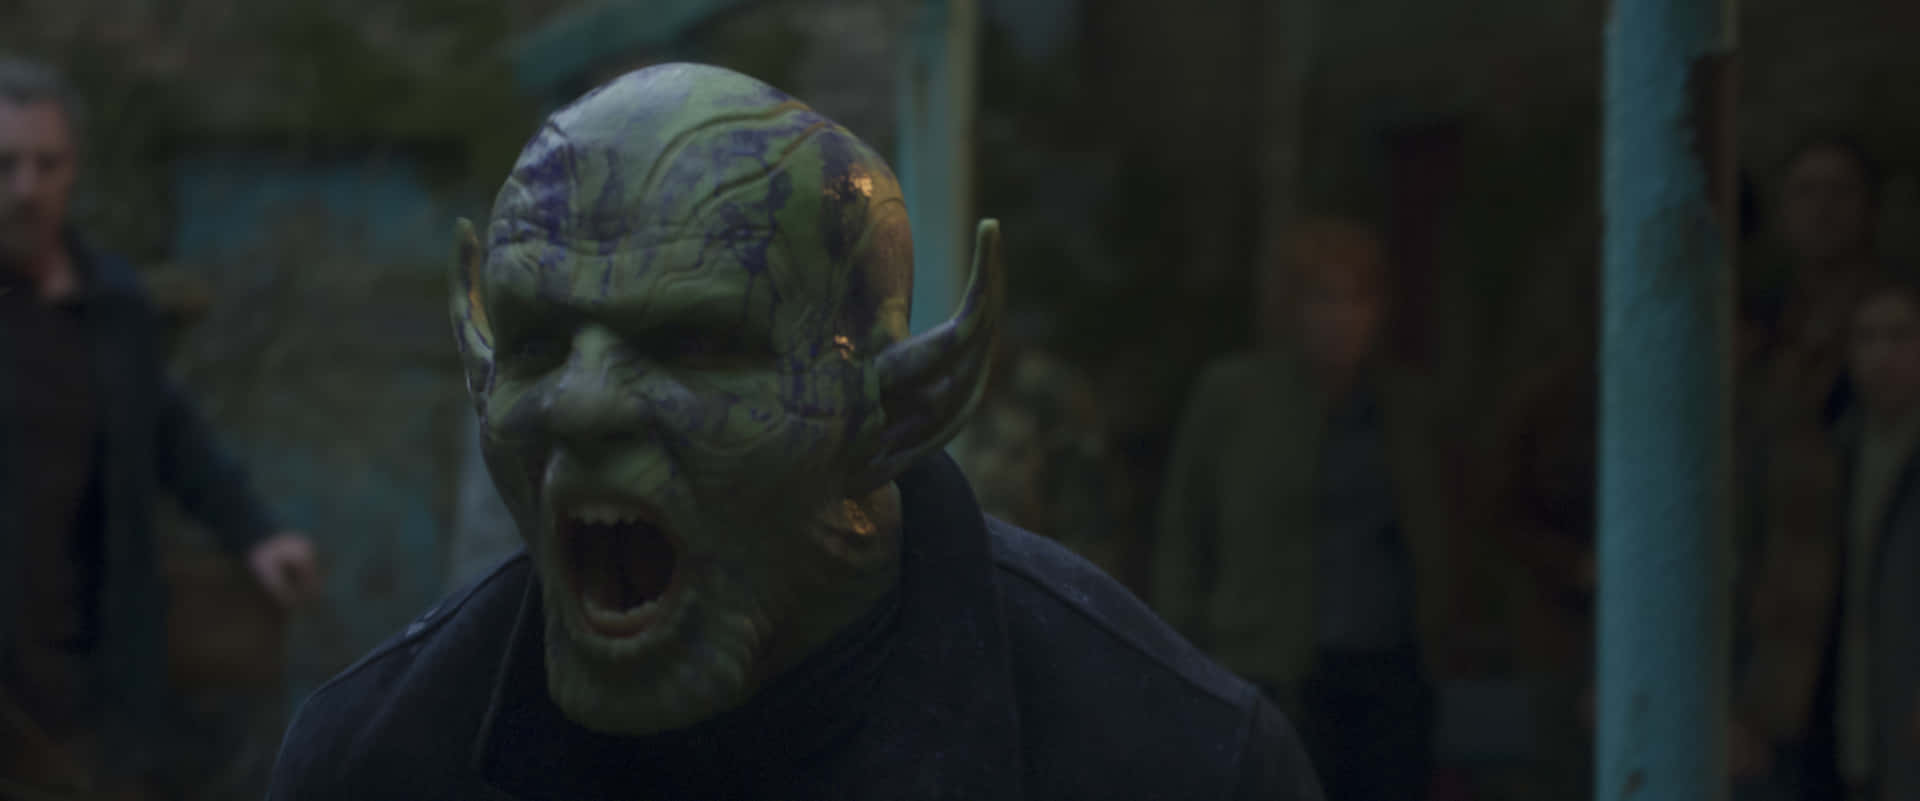 Nowhere Is Safe From The Shape-shifting Skrulls" Wallpaper